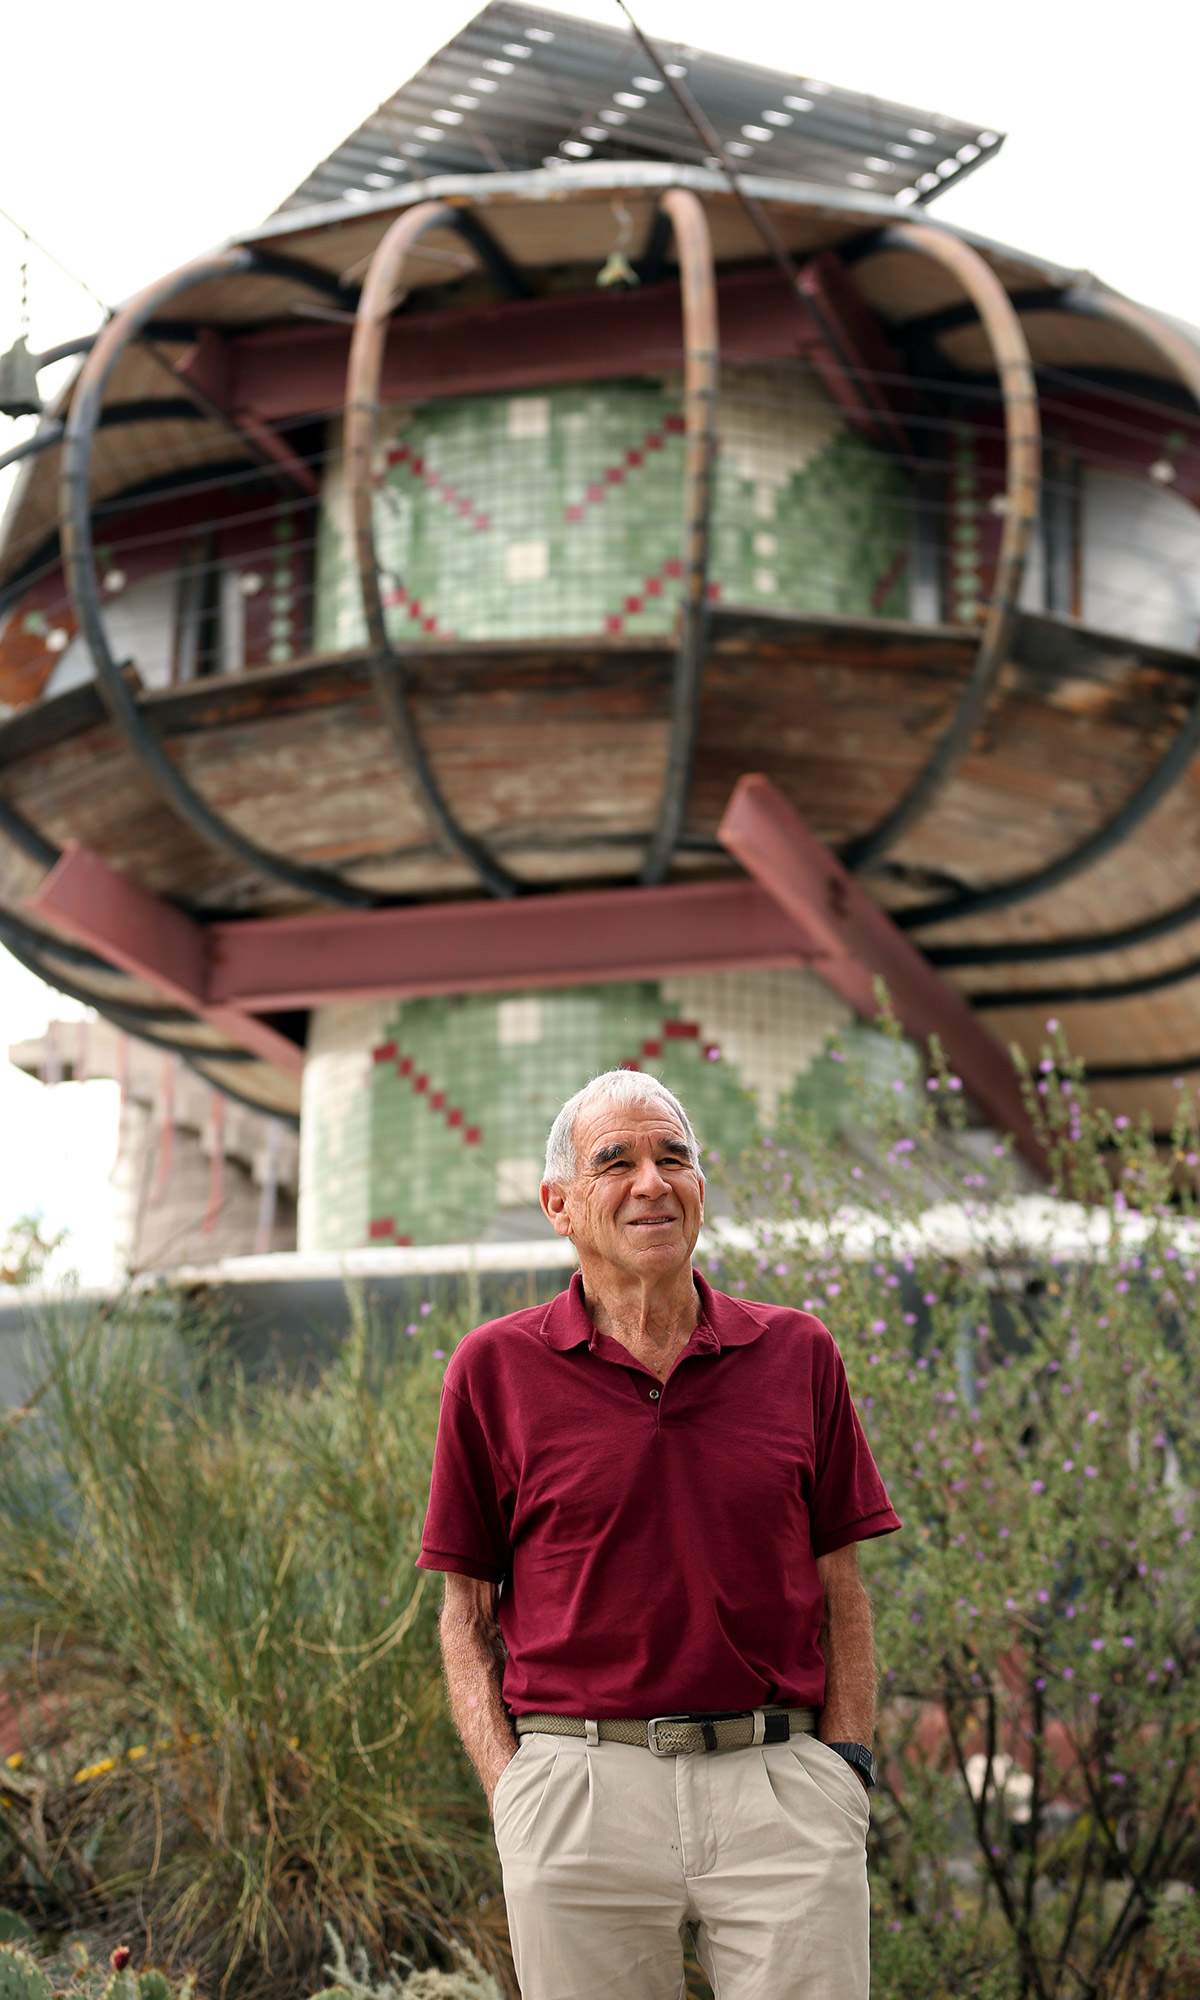 Bart Prince wearing a red shirt and khaki pants, standing in front of his home which looks like a spaceship and smiling.